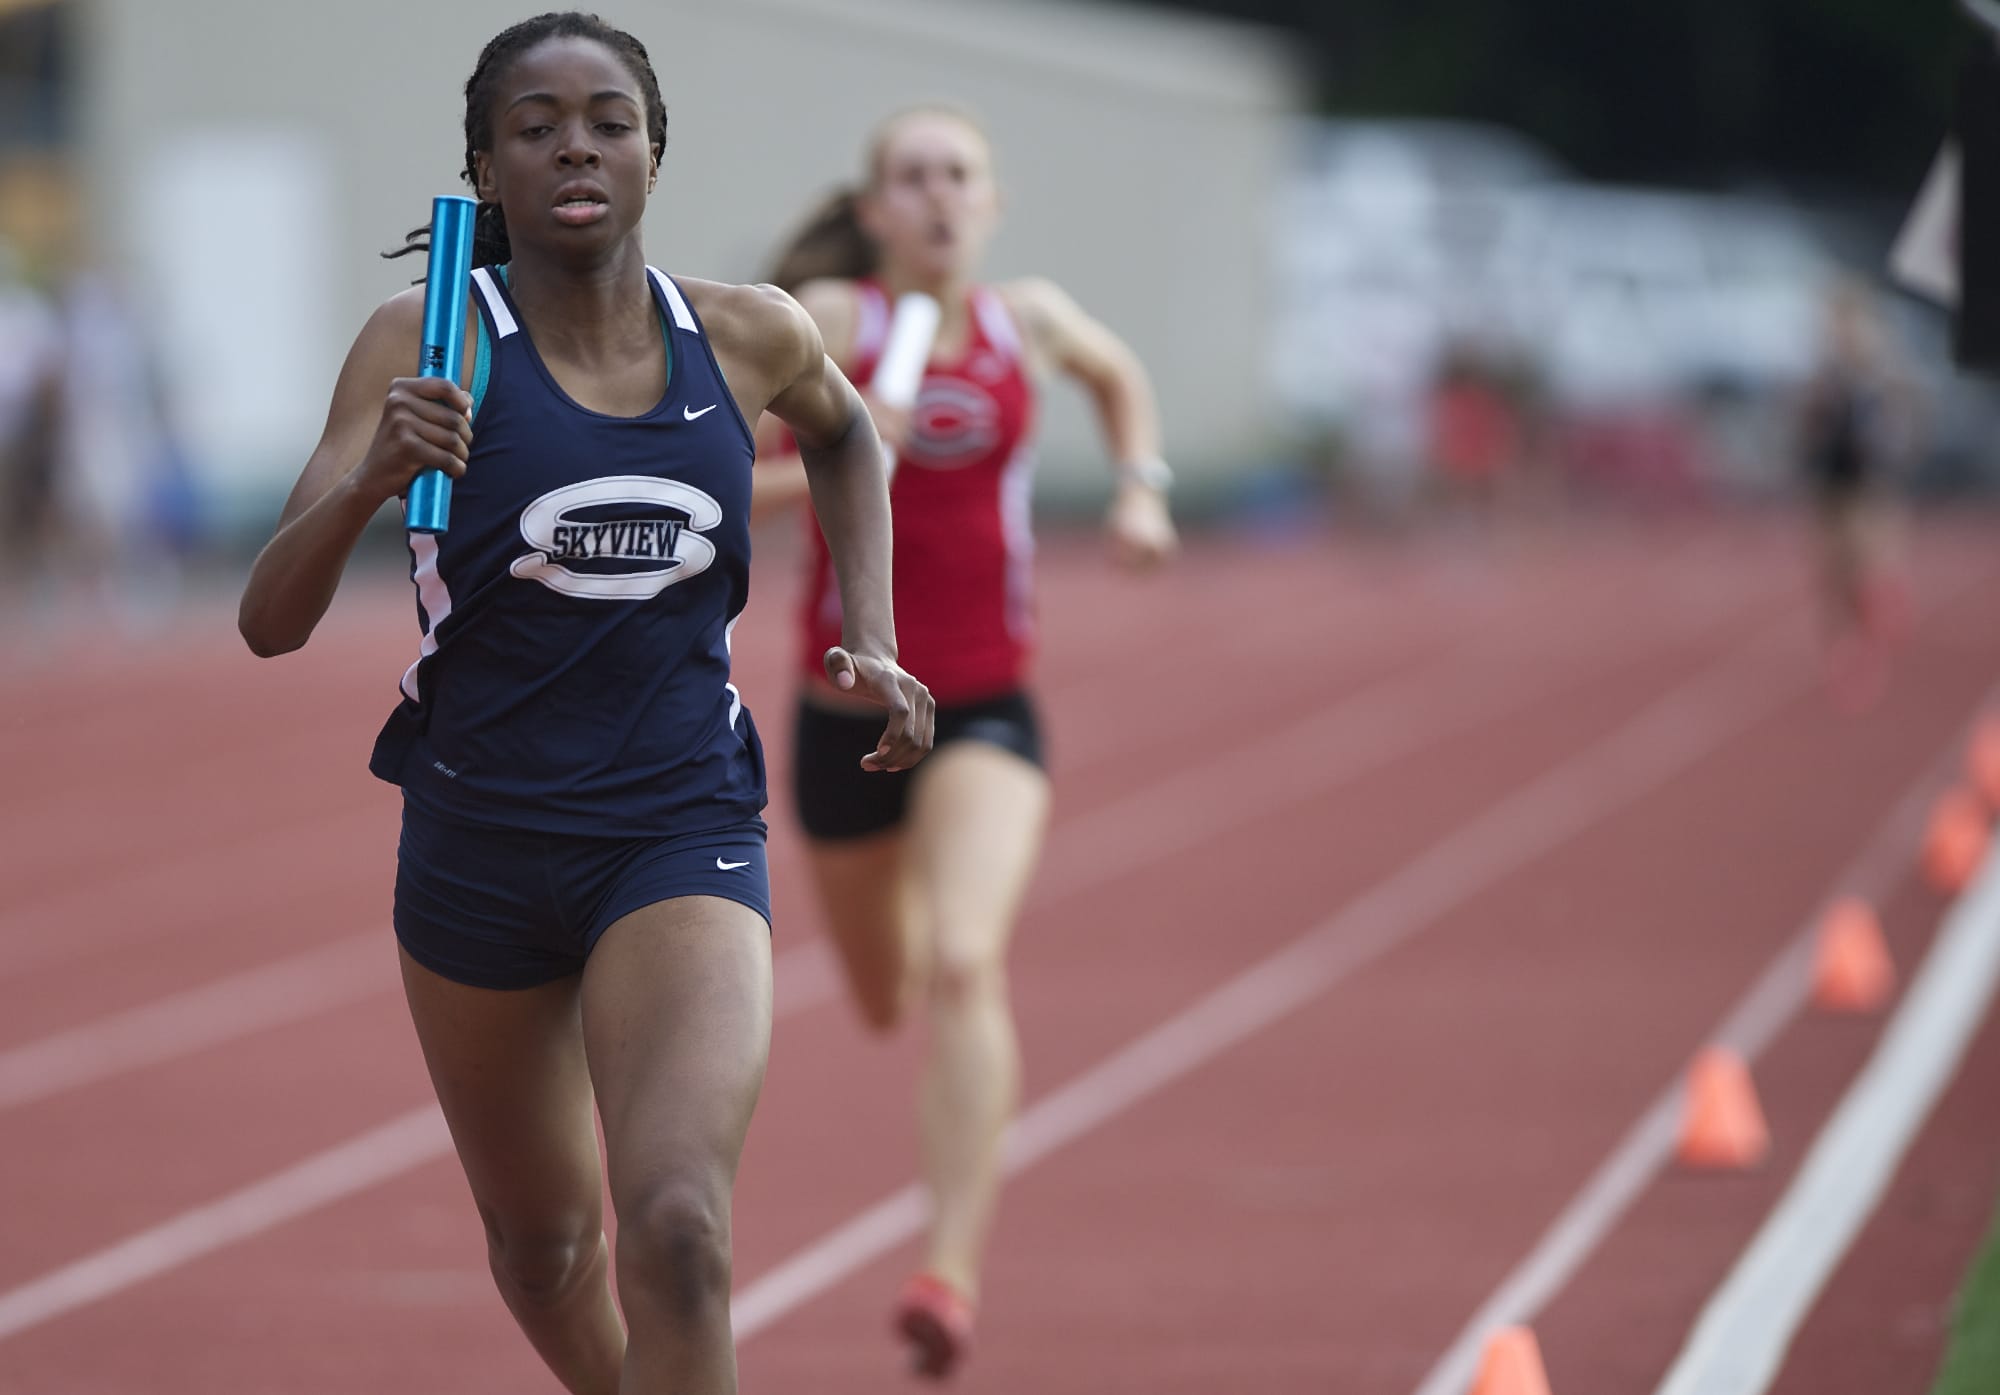 Skyview's Chisom Eke got the rare privilege of finishing ahead of Camas' Alexa Efraimson as Skyview won the girls 1,600 relay and district team title at McKenzie Stadium.